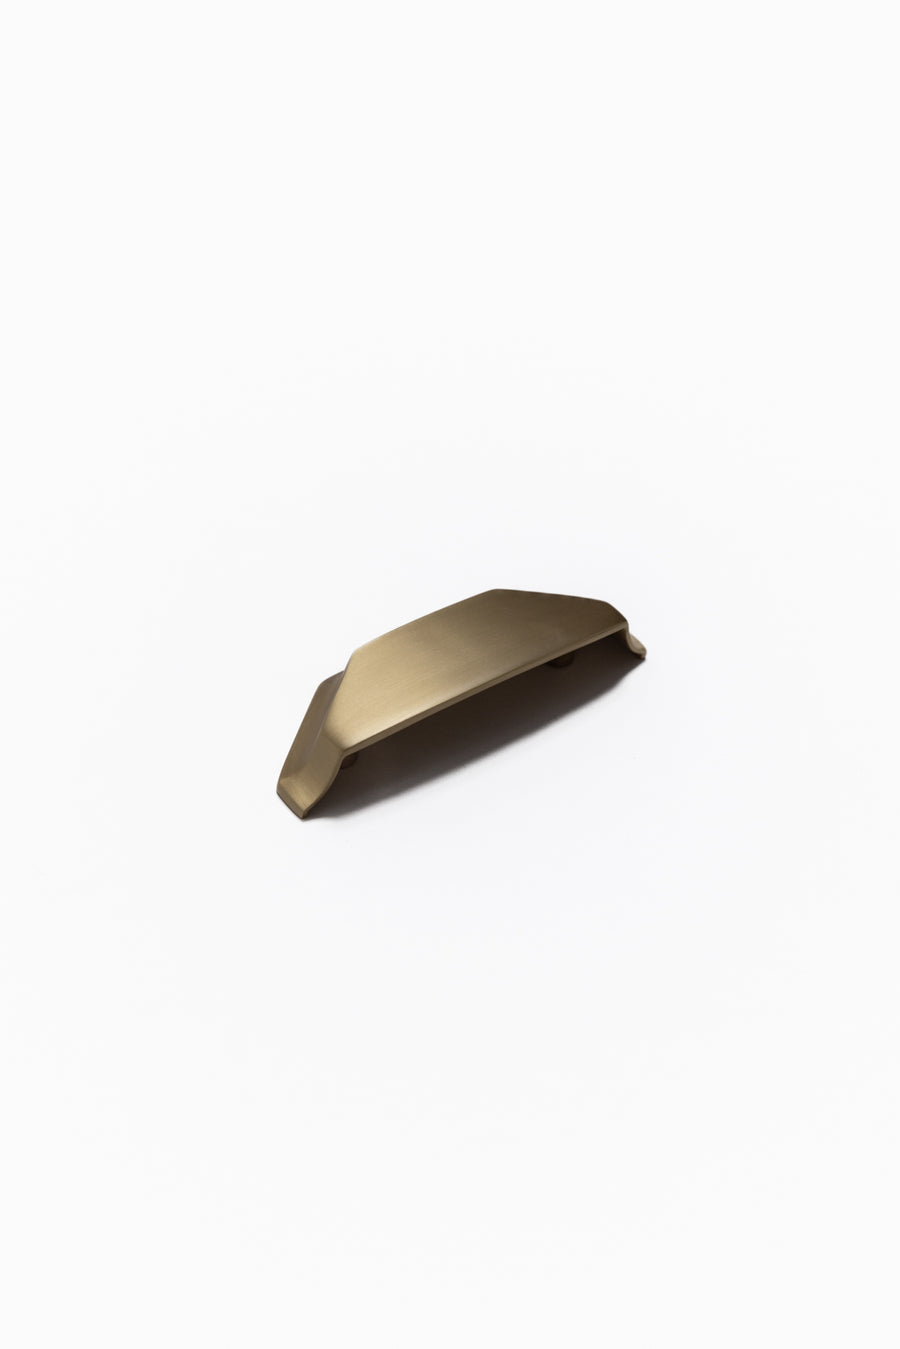 Archie Geometric Brass Cabinetry Cup Handle - Little Swagger